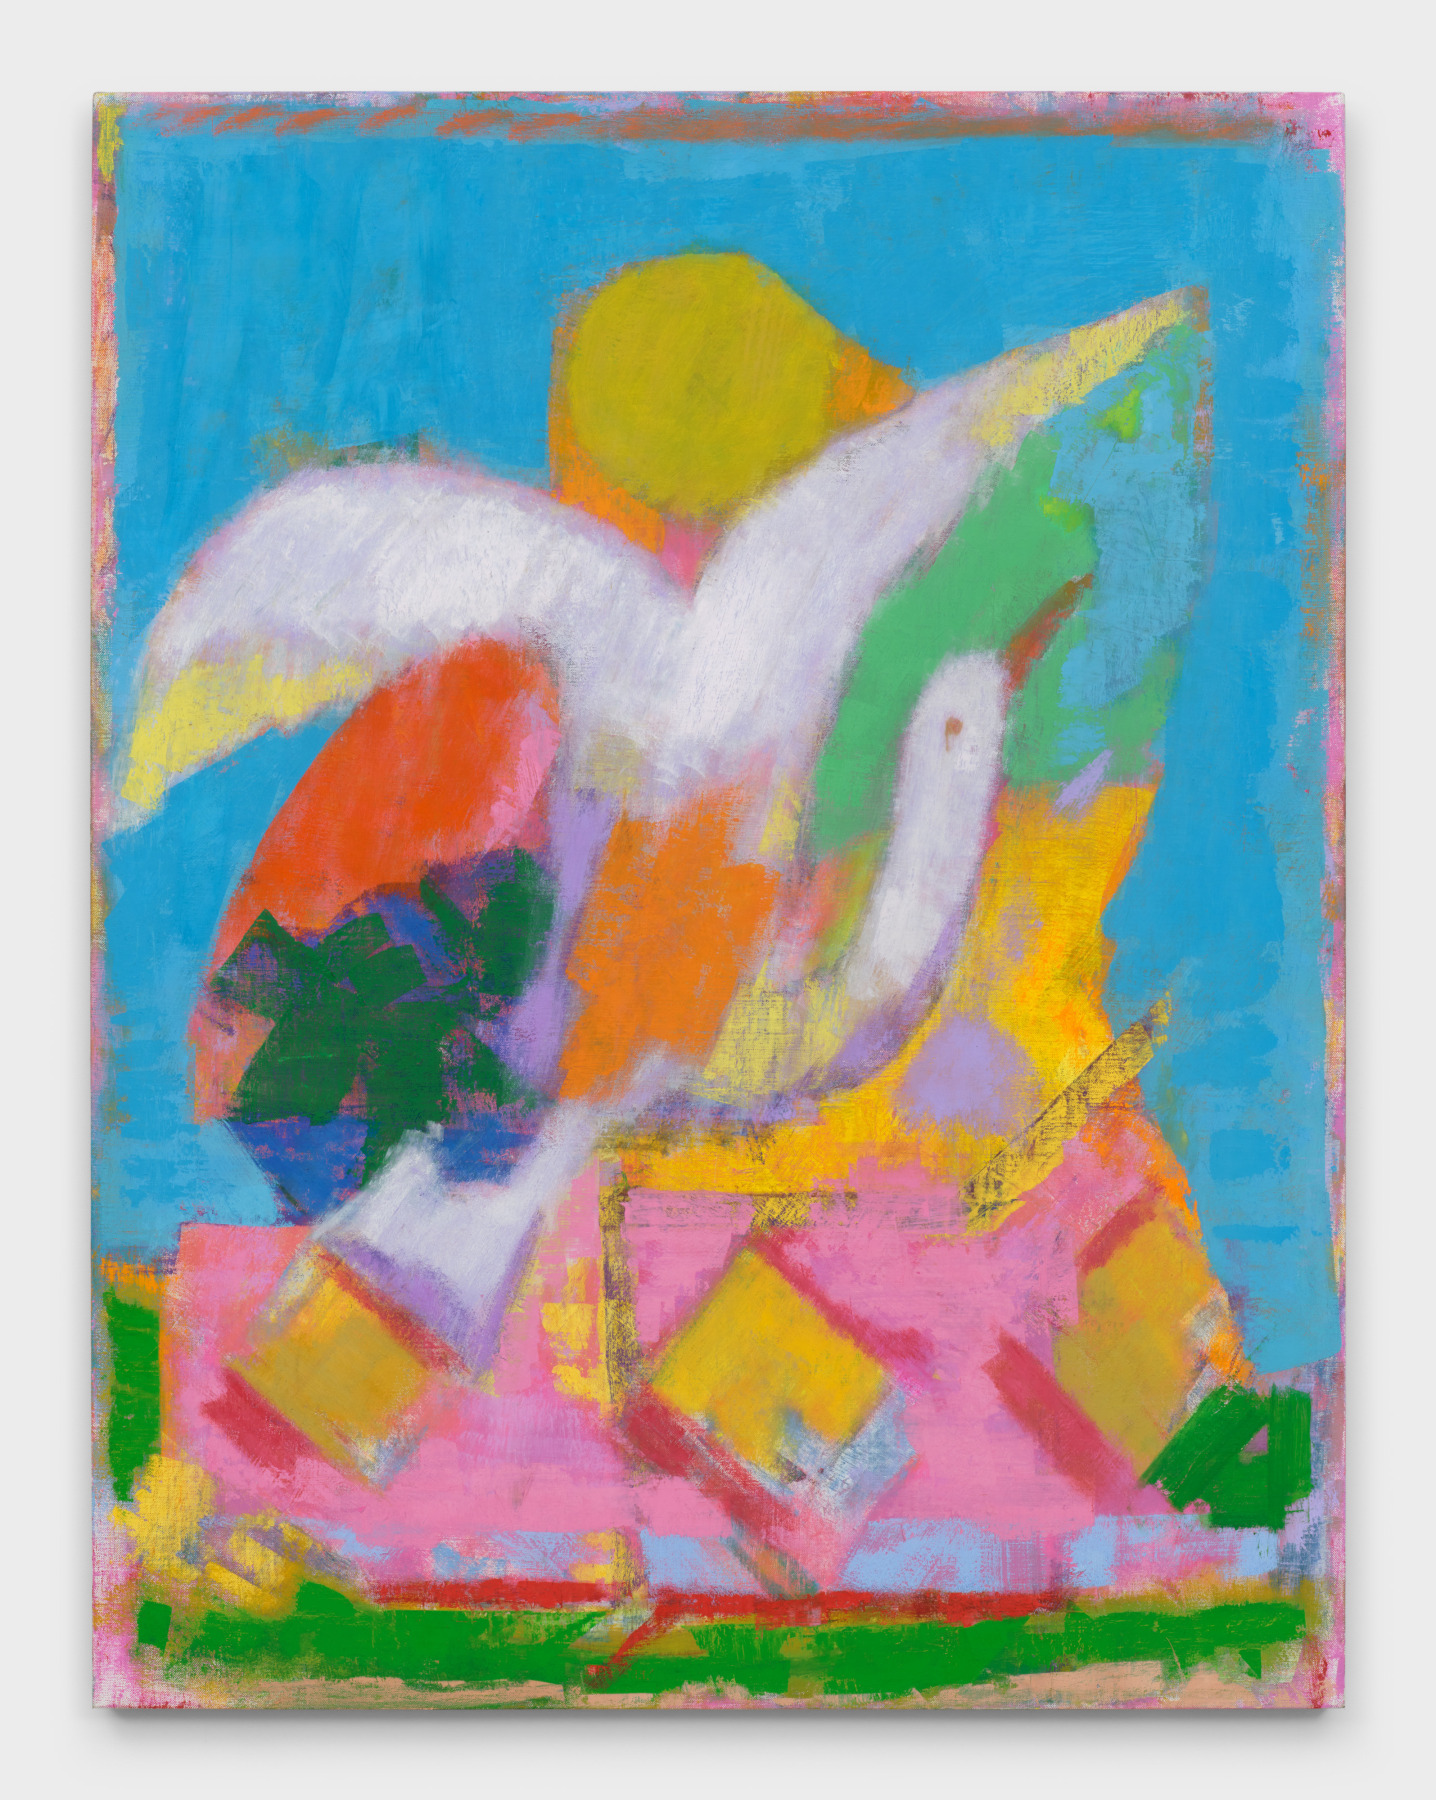 A painting by Michael Berryhill titled "Messenger," which shows a white bird ascending over an assortment of colorful abstract shapes